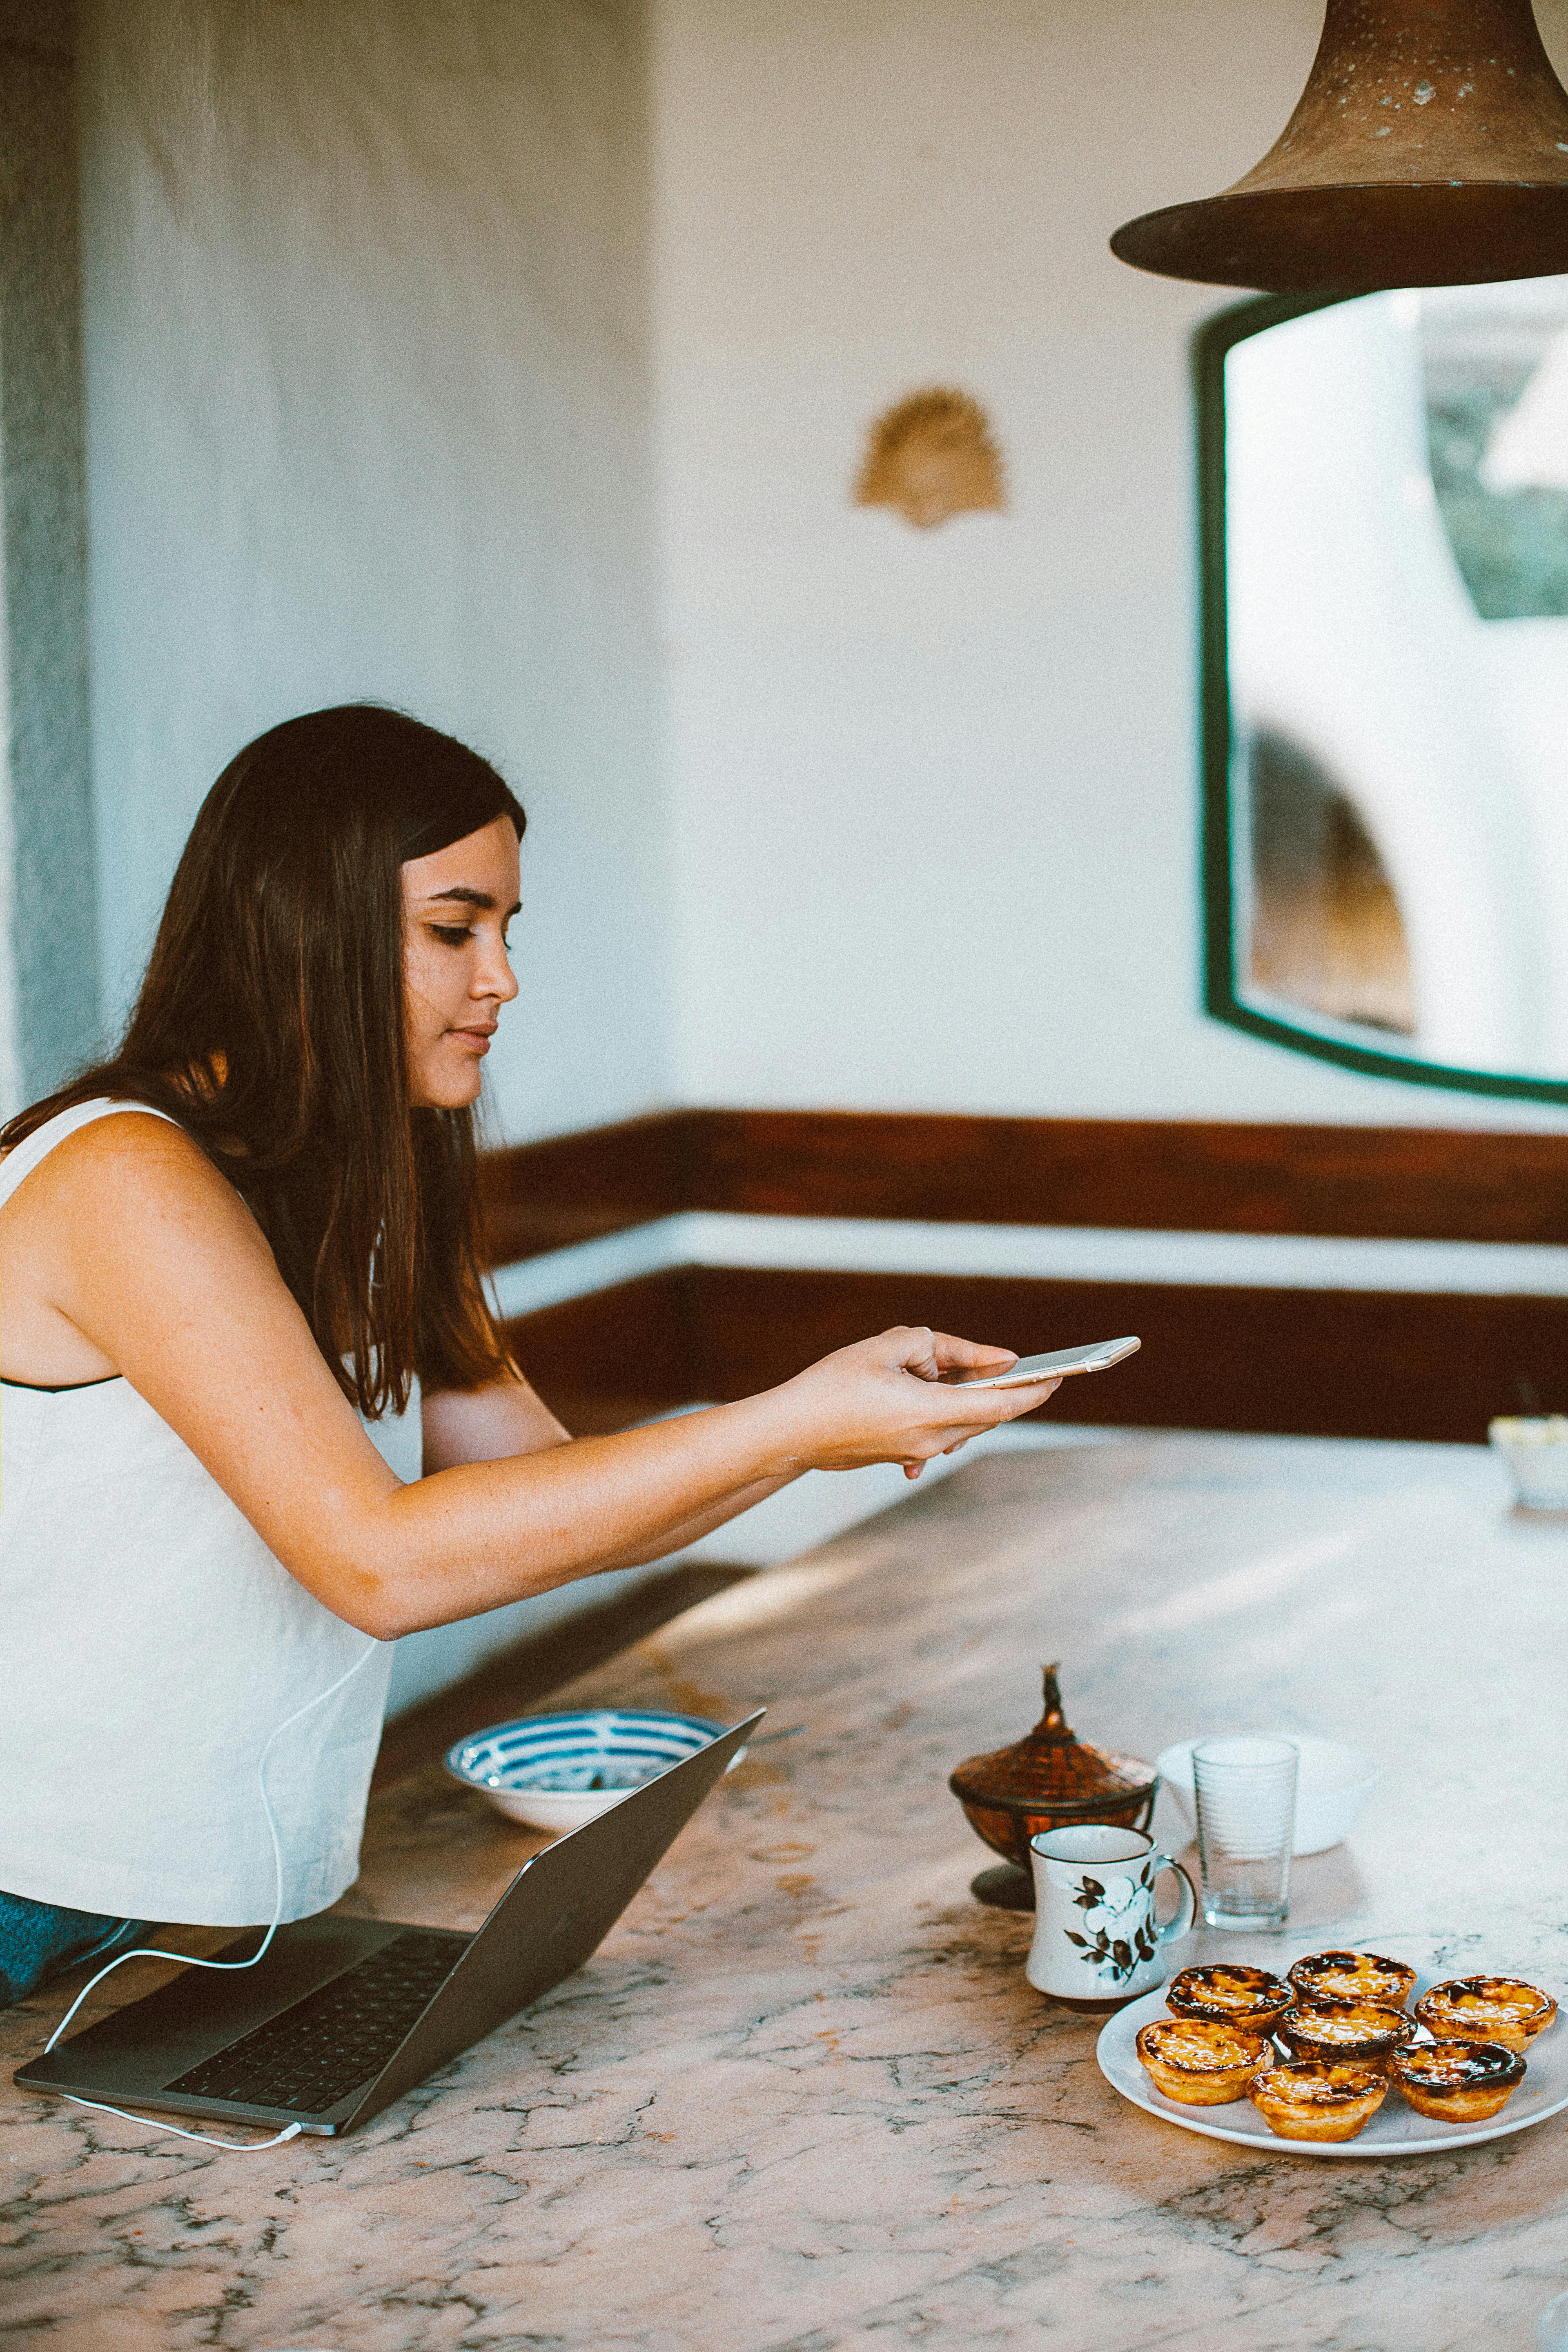 Woman Using Smartphone Taking a Picture of Food